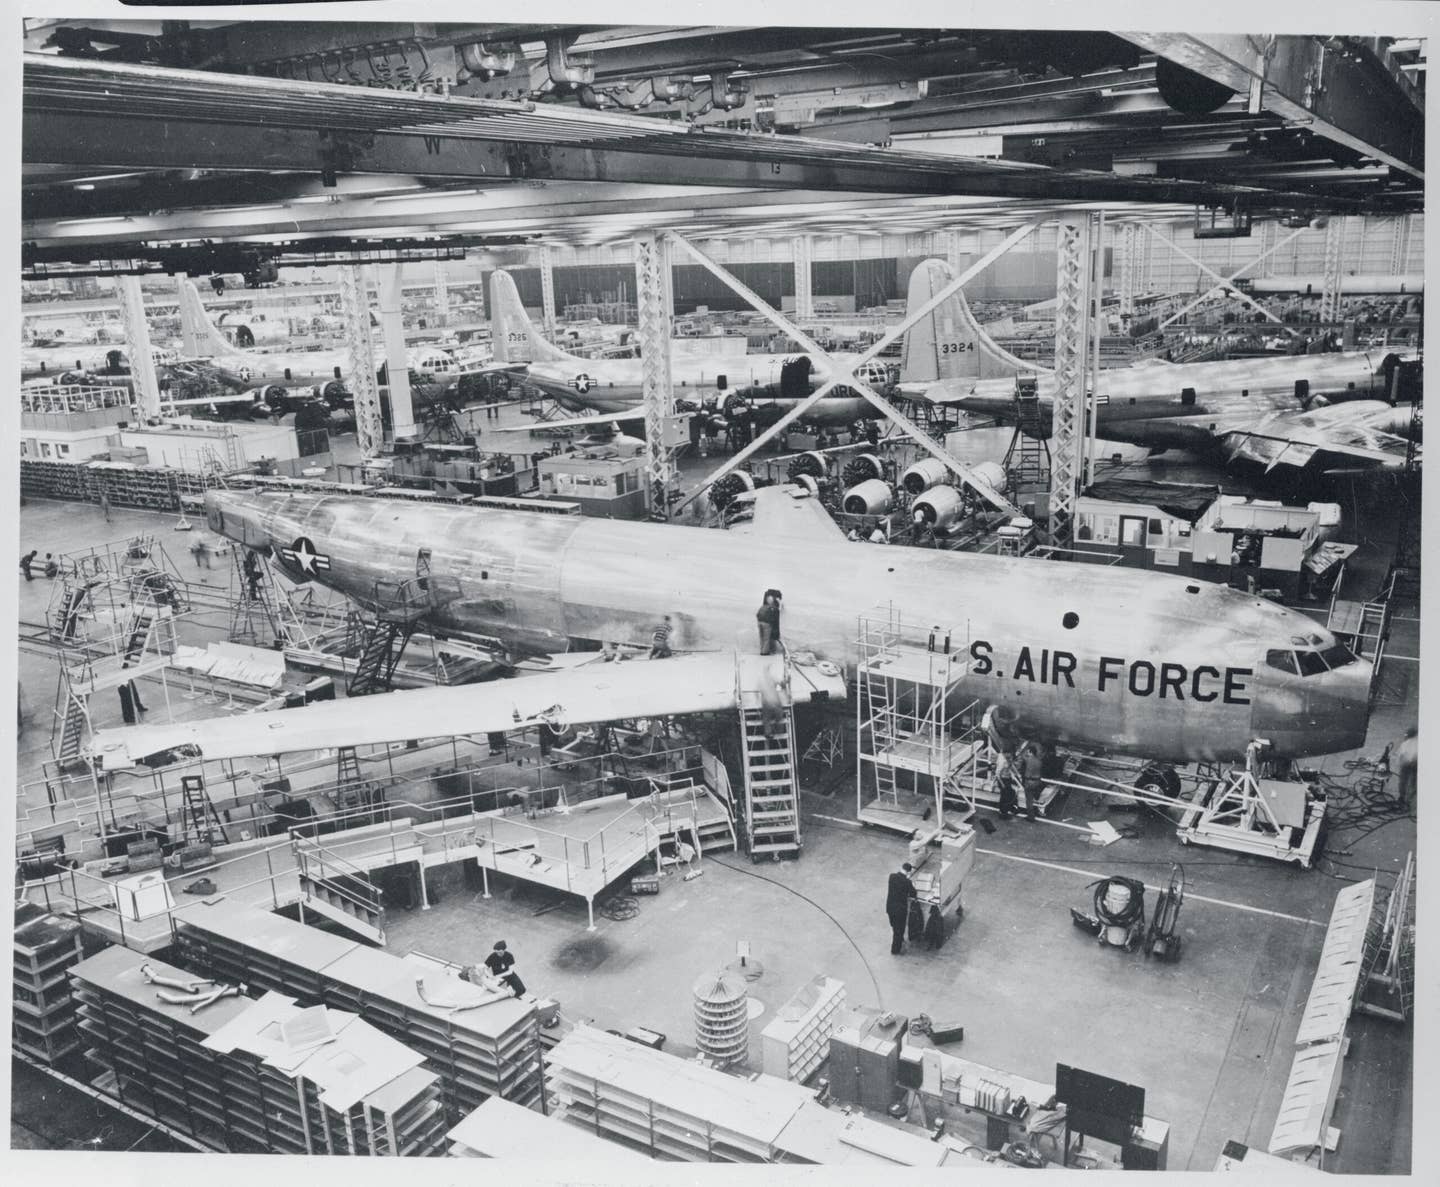 A KC-135 for Strategic Air Command takes shape at the Boeing plant in Renton, Washington, near Seattle. Note the parallel line of KC-97 piston-engine tanker transports in the background. <em>Getty Images</em>